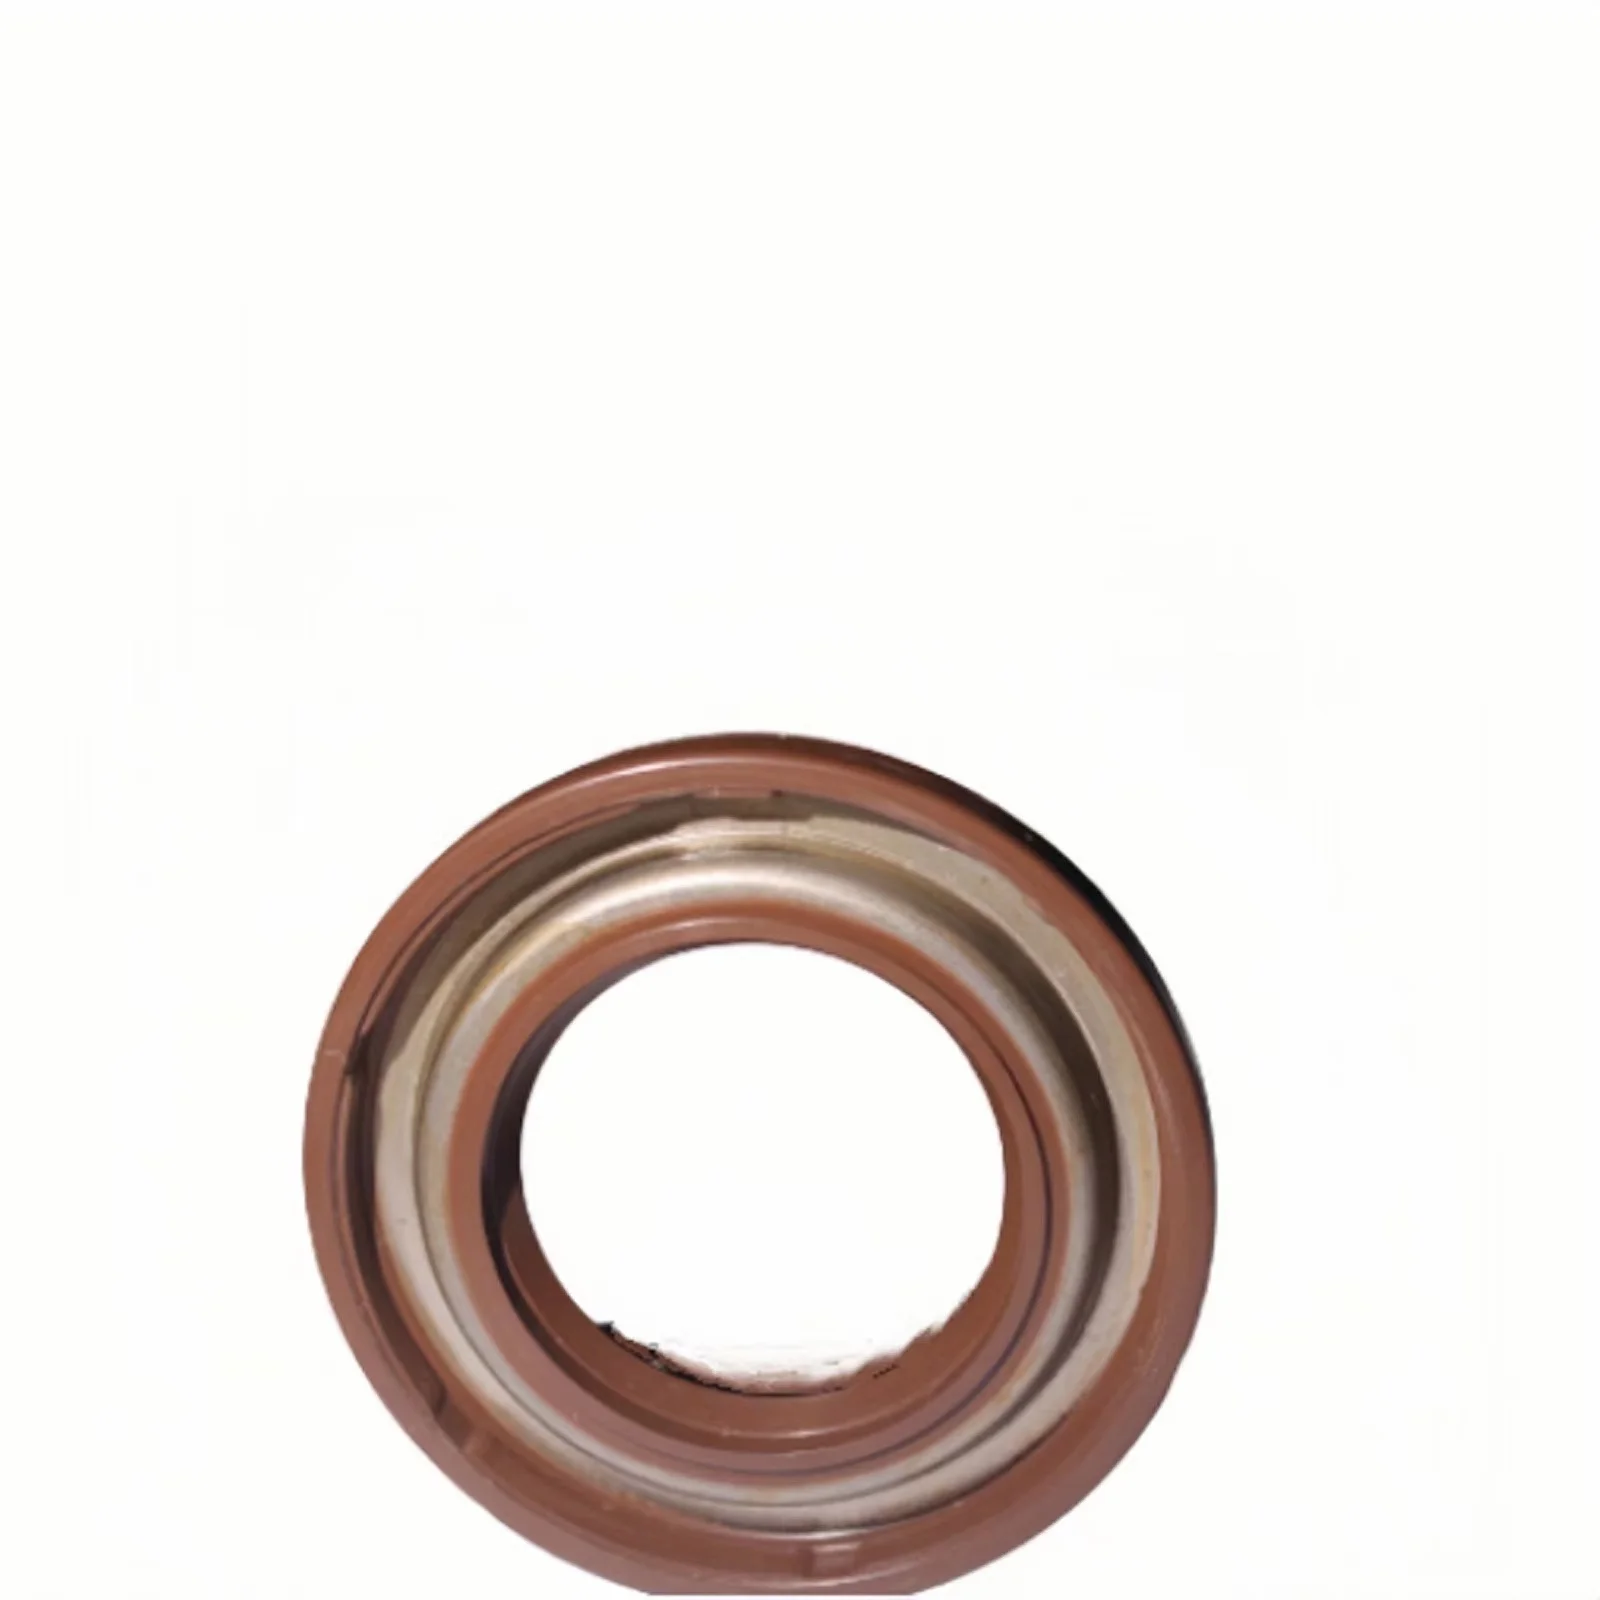 Hot Selling Cylinder Rubber Seal Dustproof Oil Seal For Hydraulic Cylinder Piston And Rod